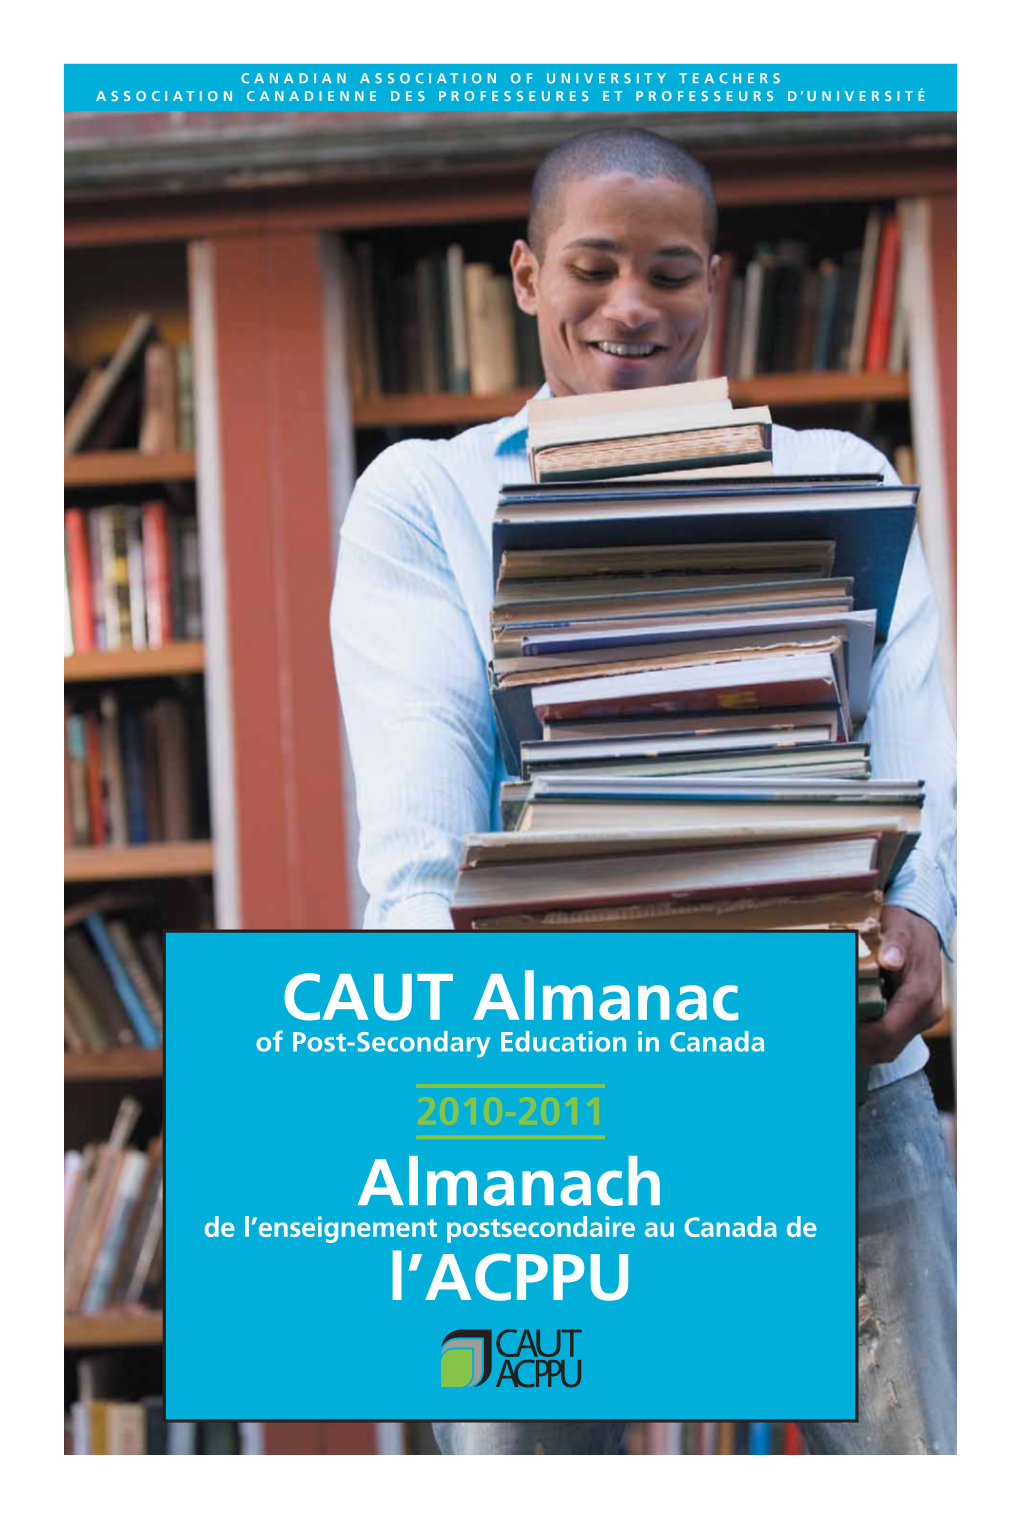 CAUT Almanac of Post-Secondary Education in Canada 2010-2011 Almanach De L’Enseignement Postsecondaire Au Canada De L’ACPPU Committed to Human Rights, Equity And